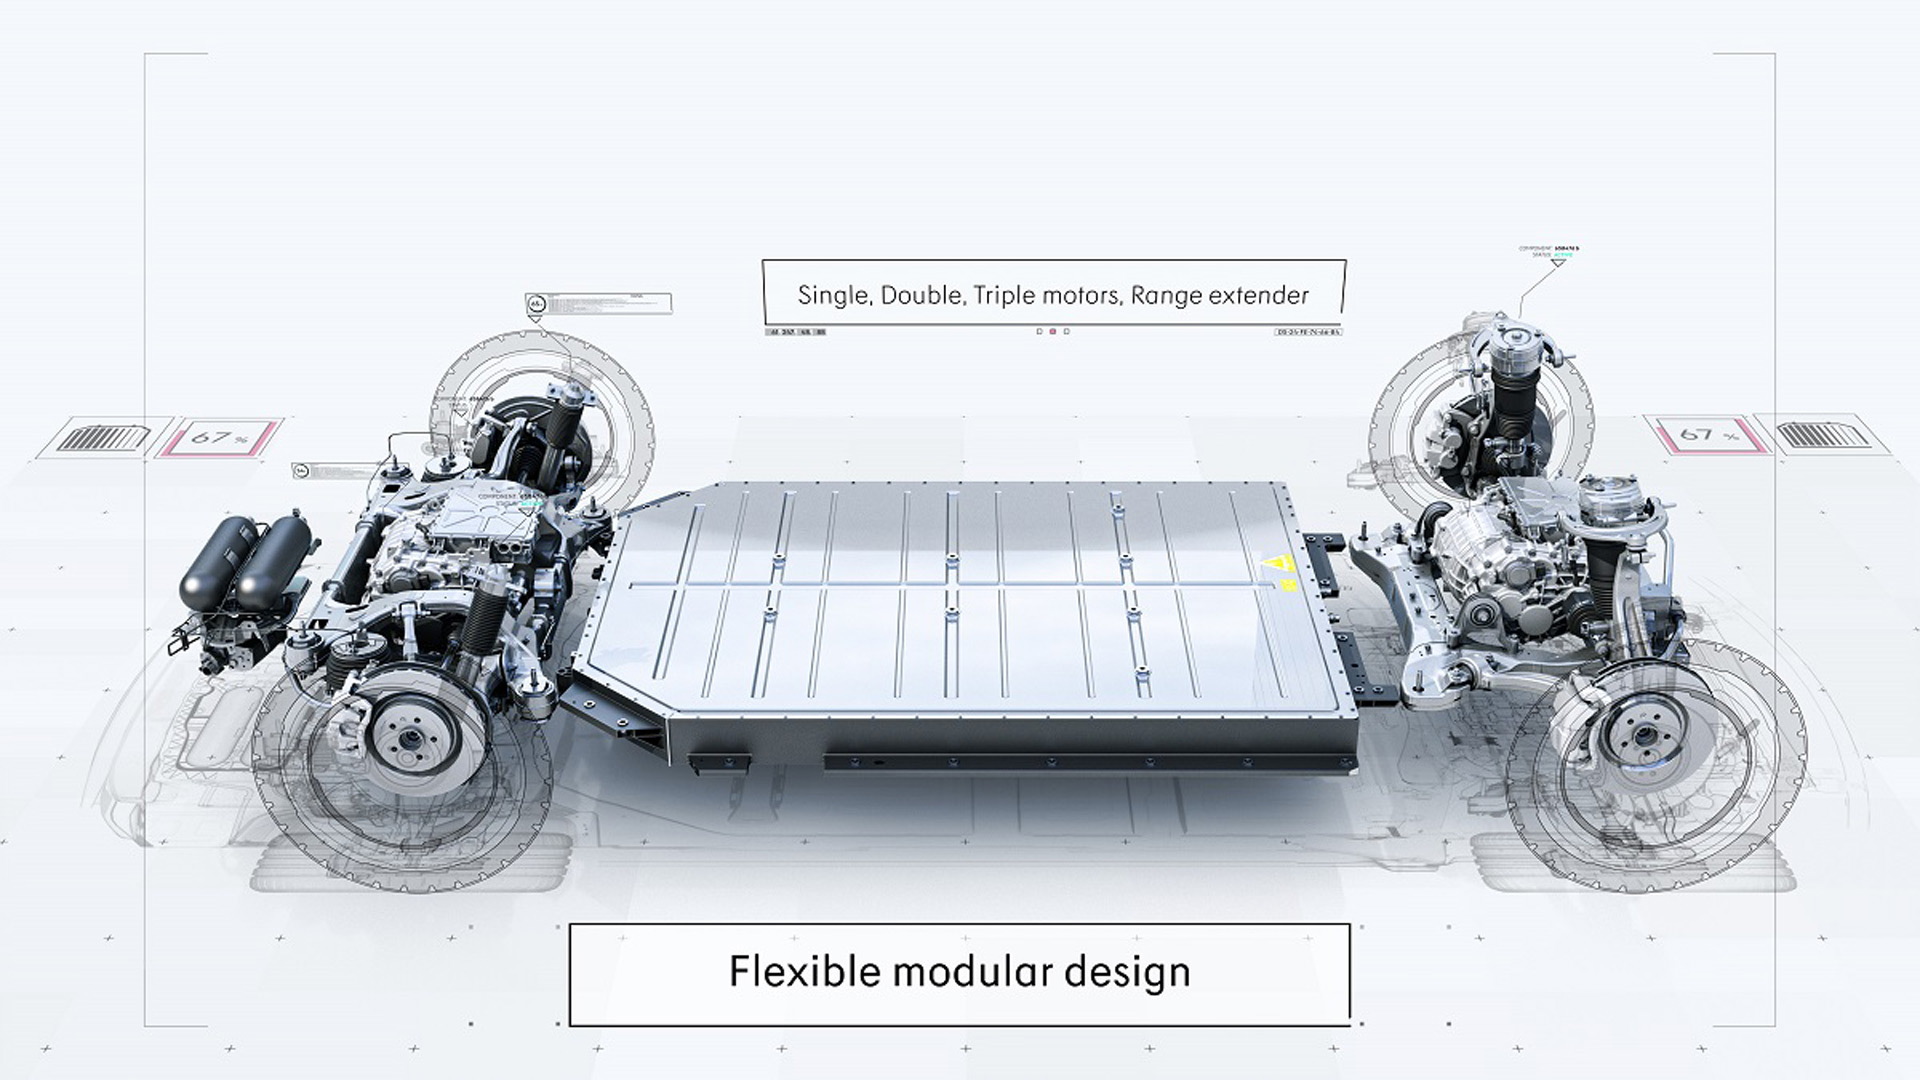 Geely SEA (Sustainable Experience Architecture) modular EV platform